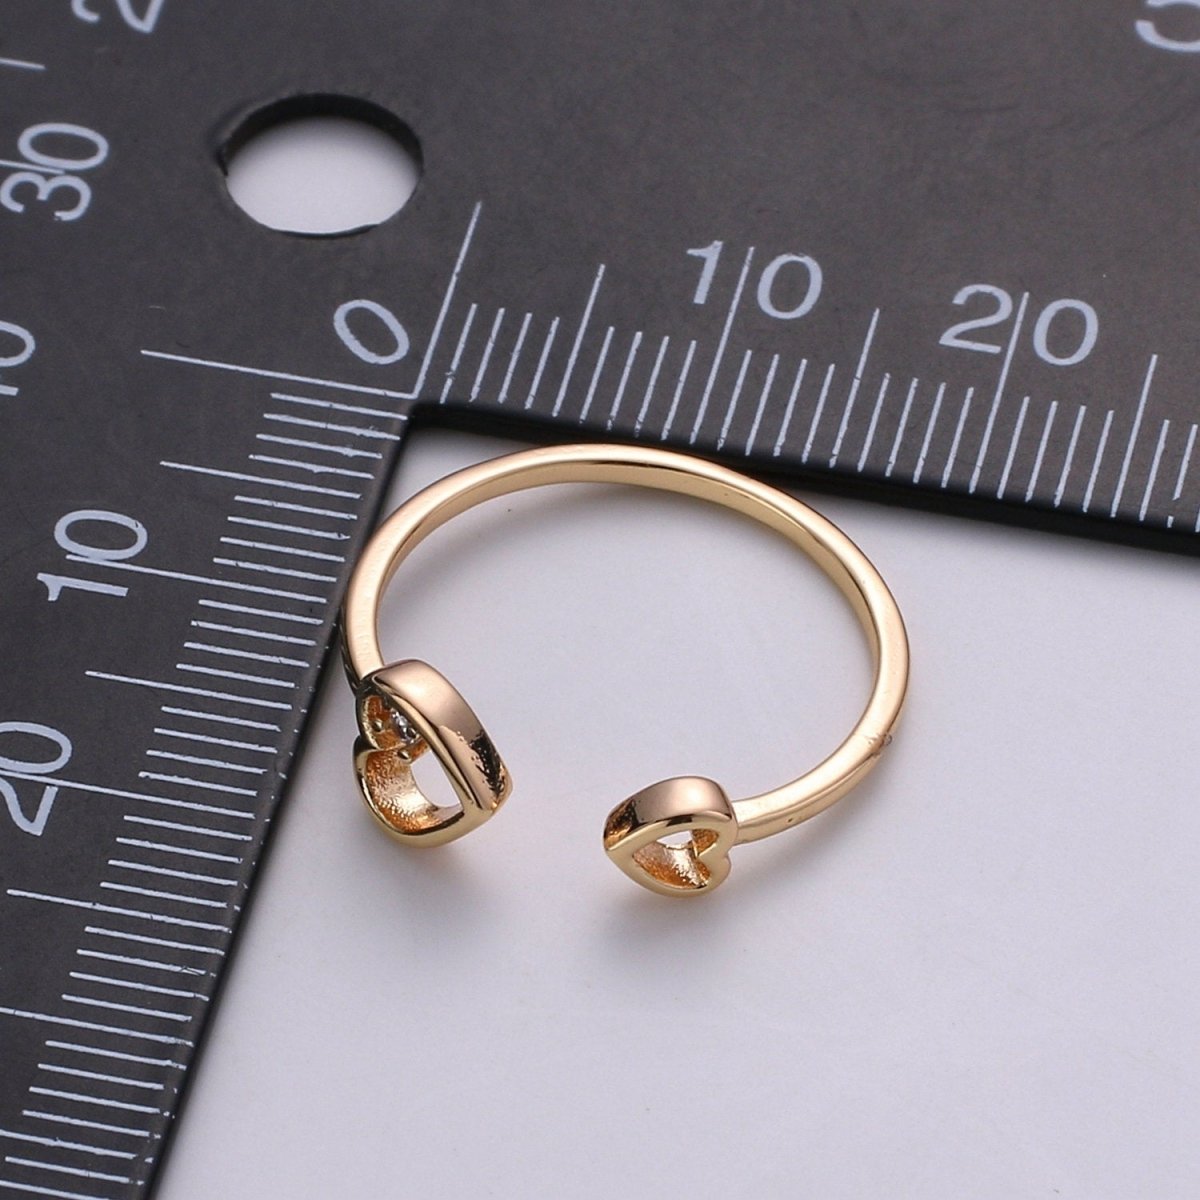 Minimalist Heart Ring, Dainty Gold Ring, Stacking Ring, Heart Ring, Open Heart Ring, Heart Rings, Artsy Heart Ring, Gift for her woman R-058 - DLUXCA